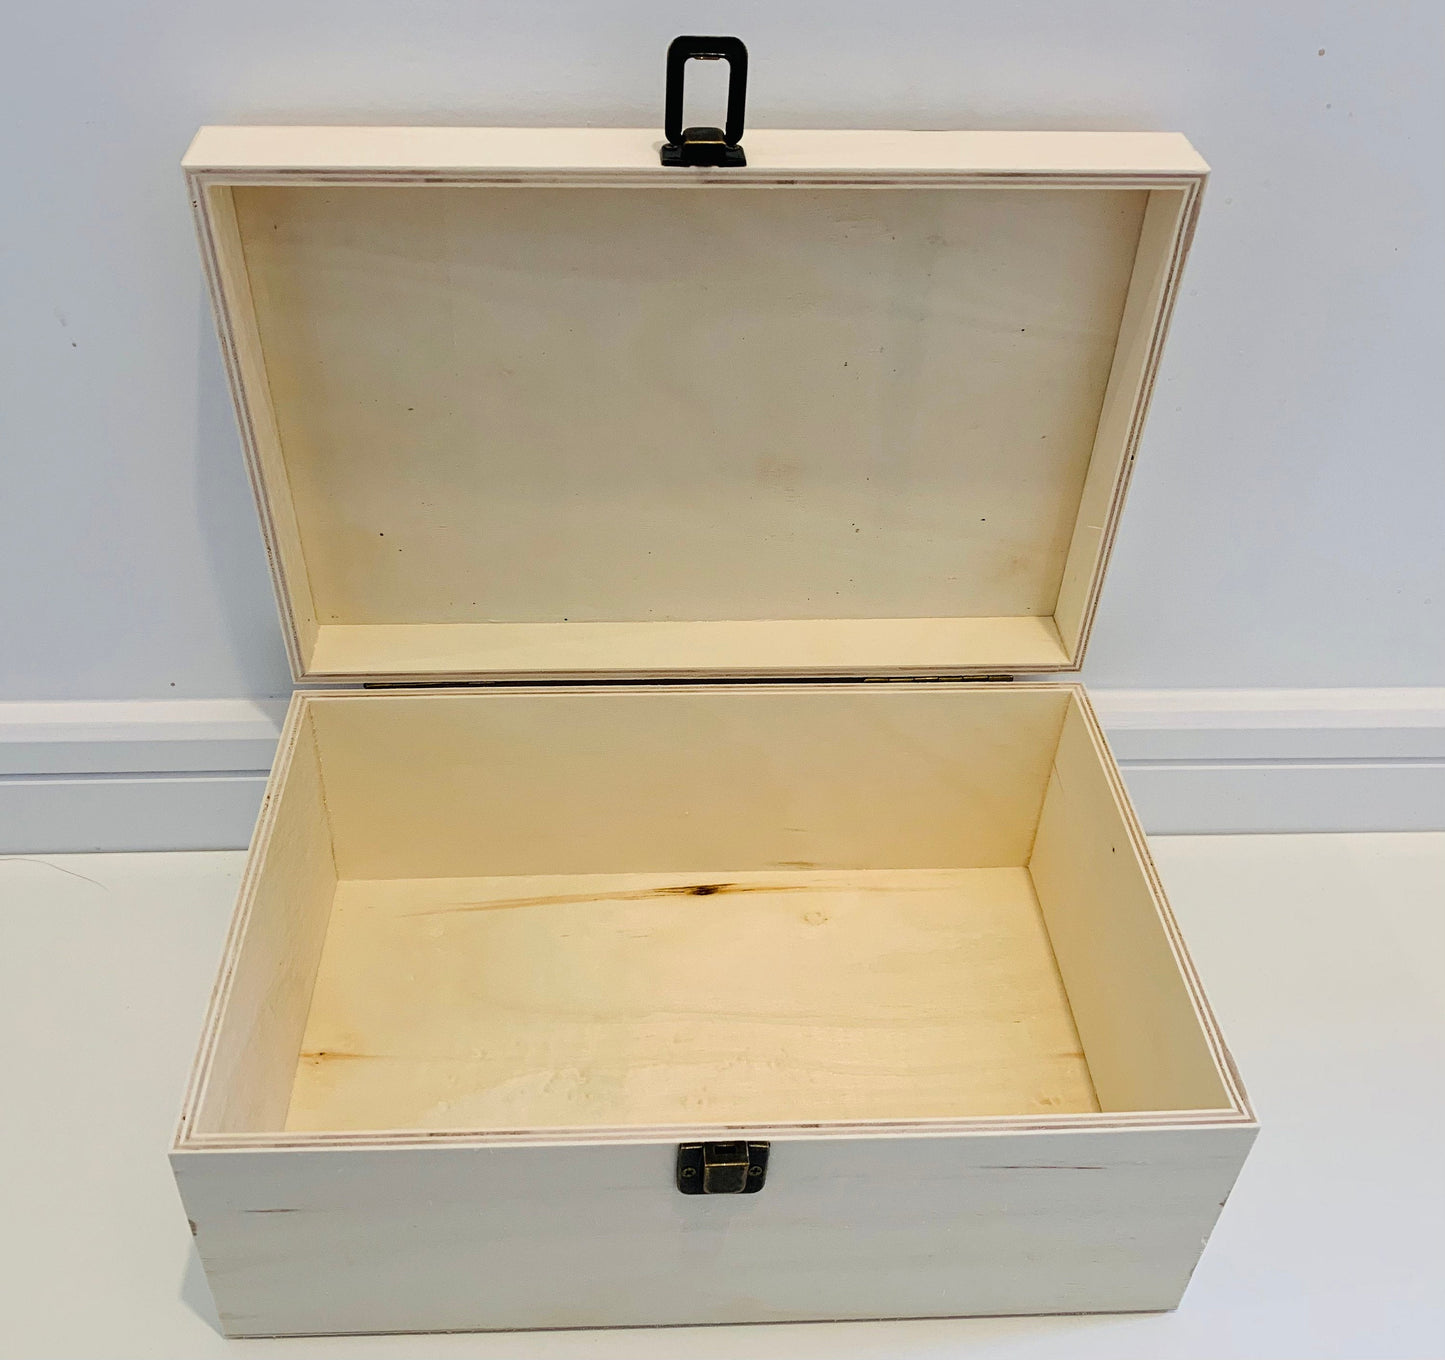 Large Personalised Engraved Wooden Craft Sewing Box - Resplendent Aurora